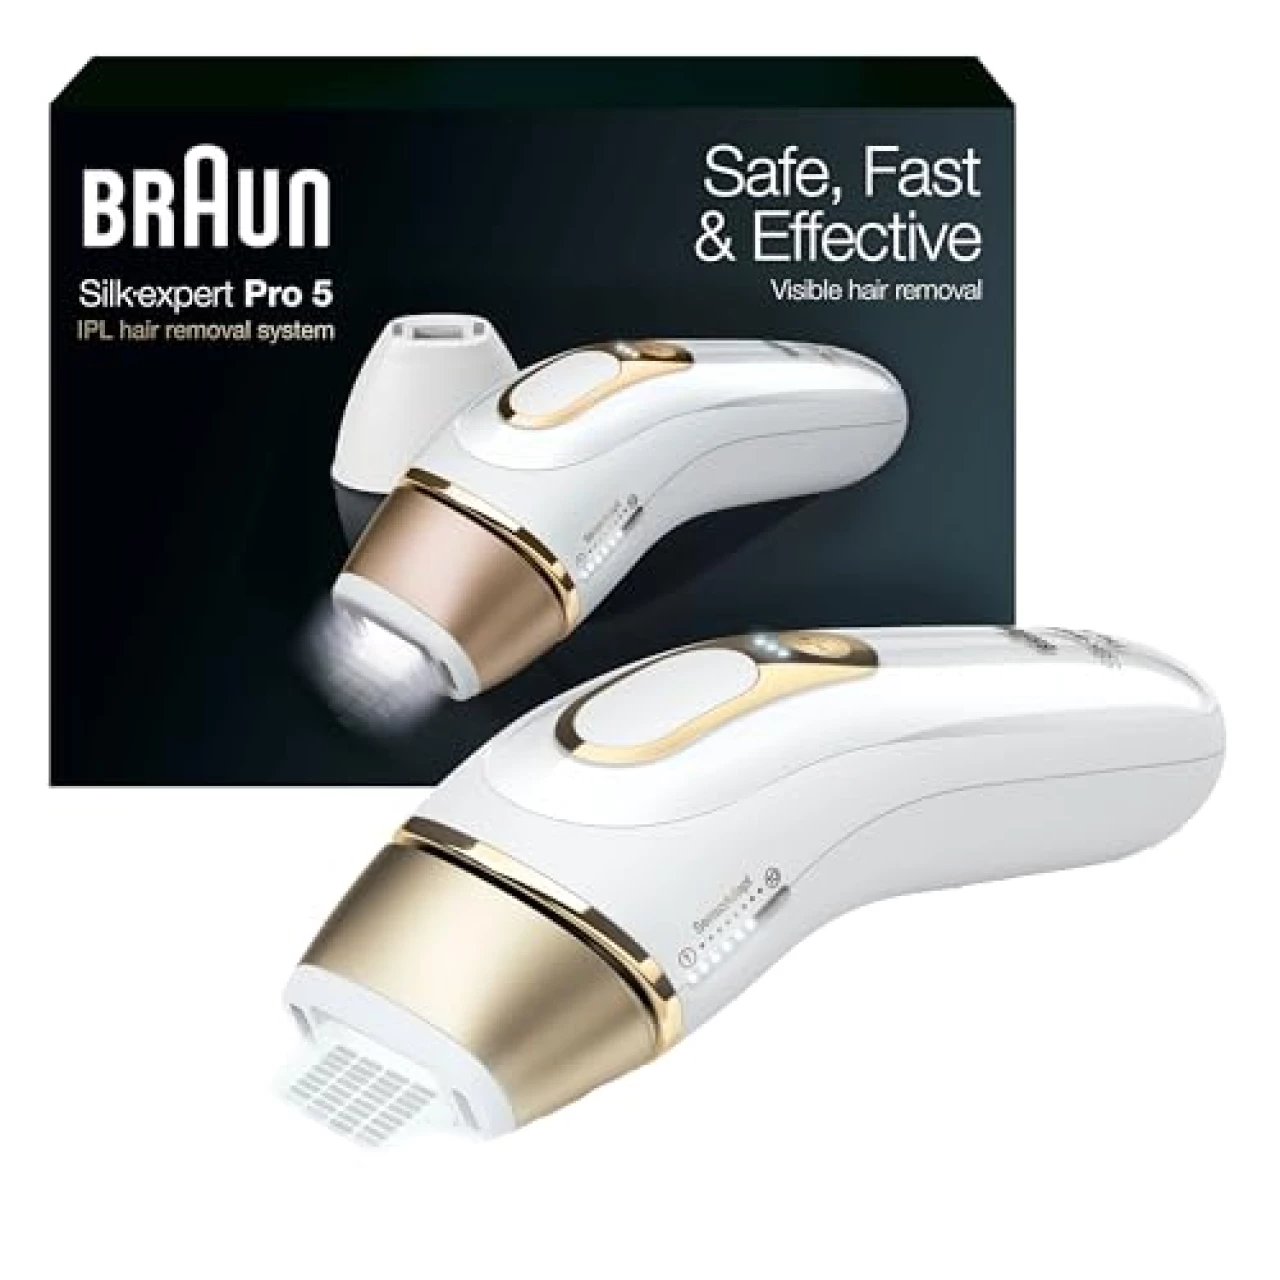 Braun IPL Long-Lasting Hair Removal for Women and Men, Silk Expert Pro 5 PL5137 with Venus Swirl Razor, Long-lasting Reduction in Hair Regrowth for Body &amp; Face, Corded